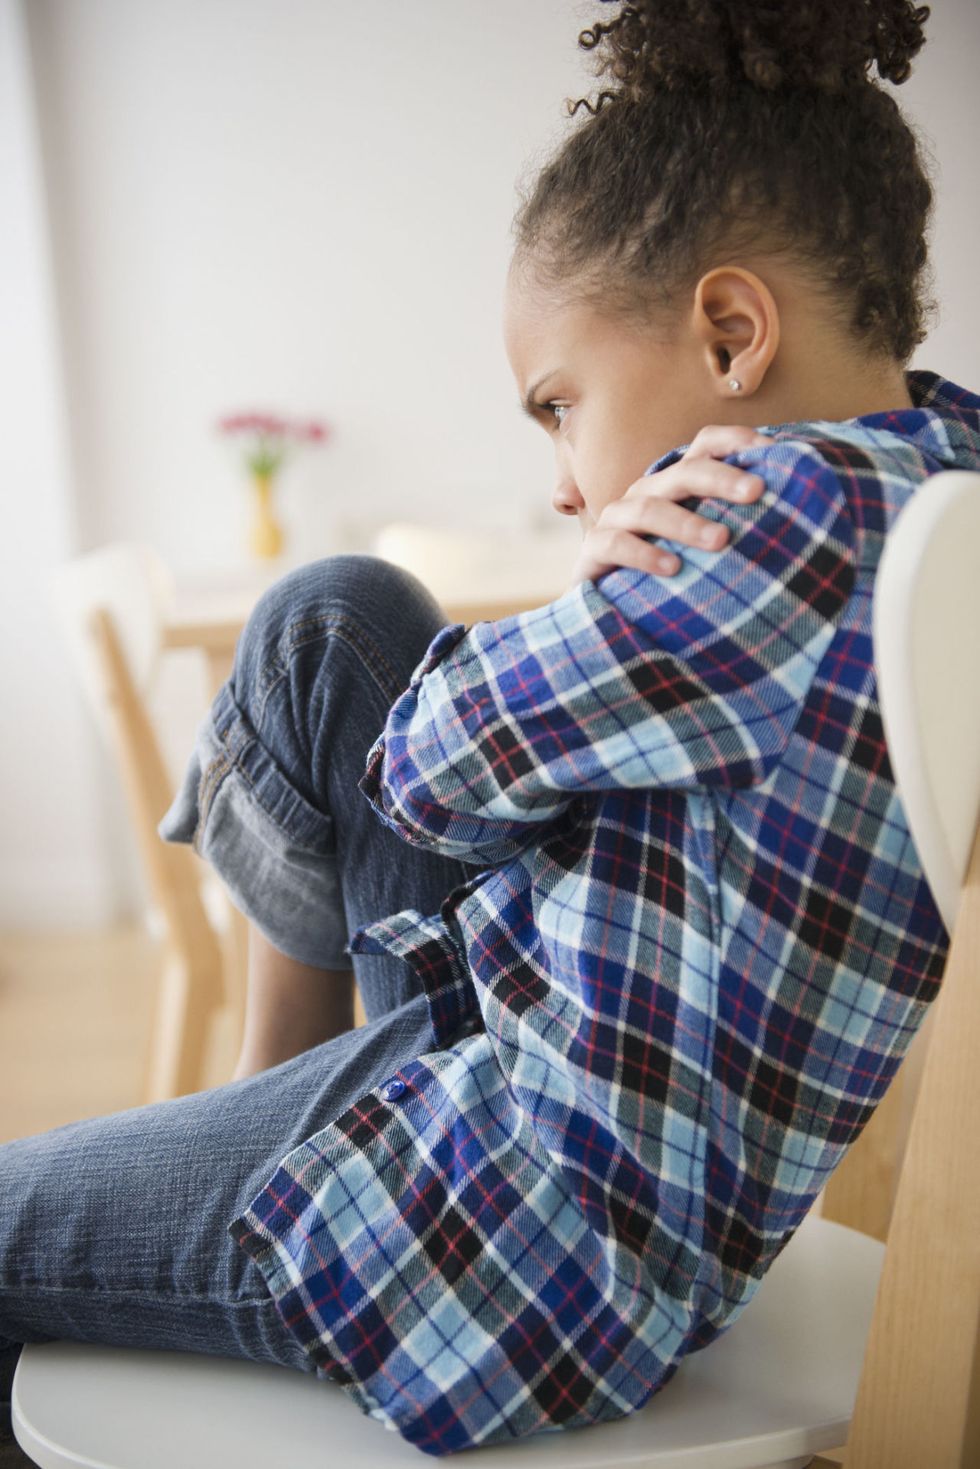 signs of child anxiety: temper tantrums and irritability